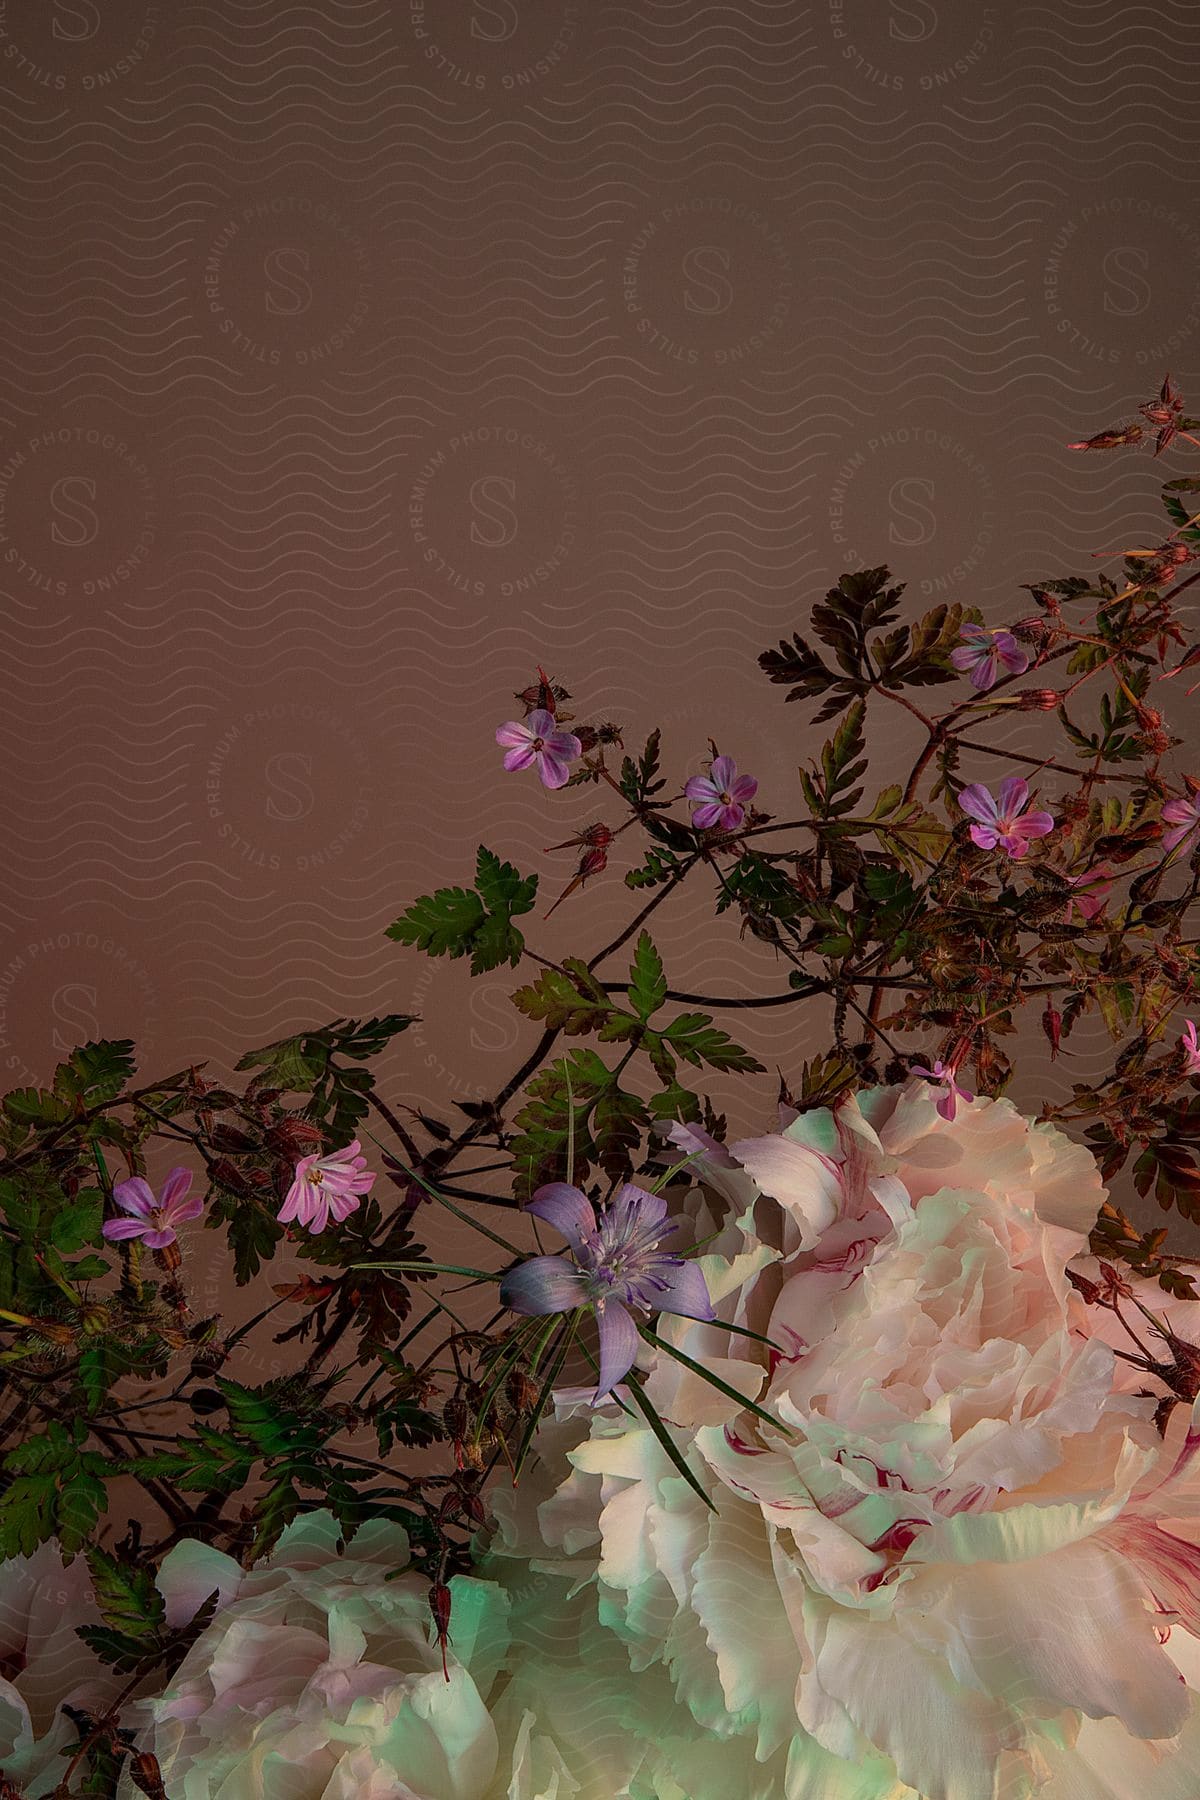 A bouquet of white, purple, and pink flowers against a brown background